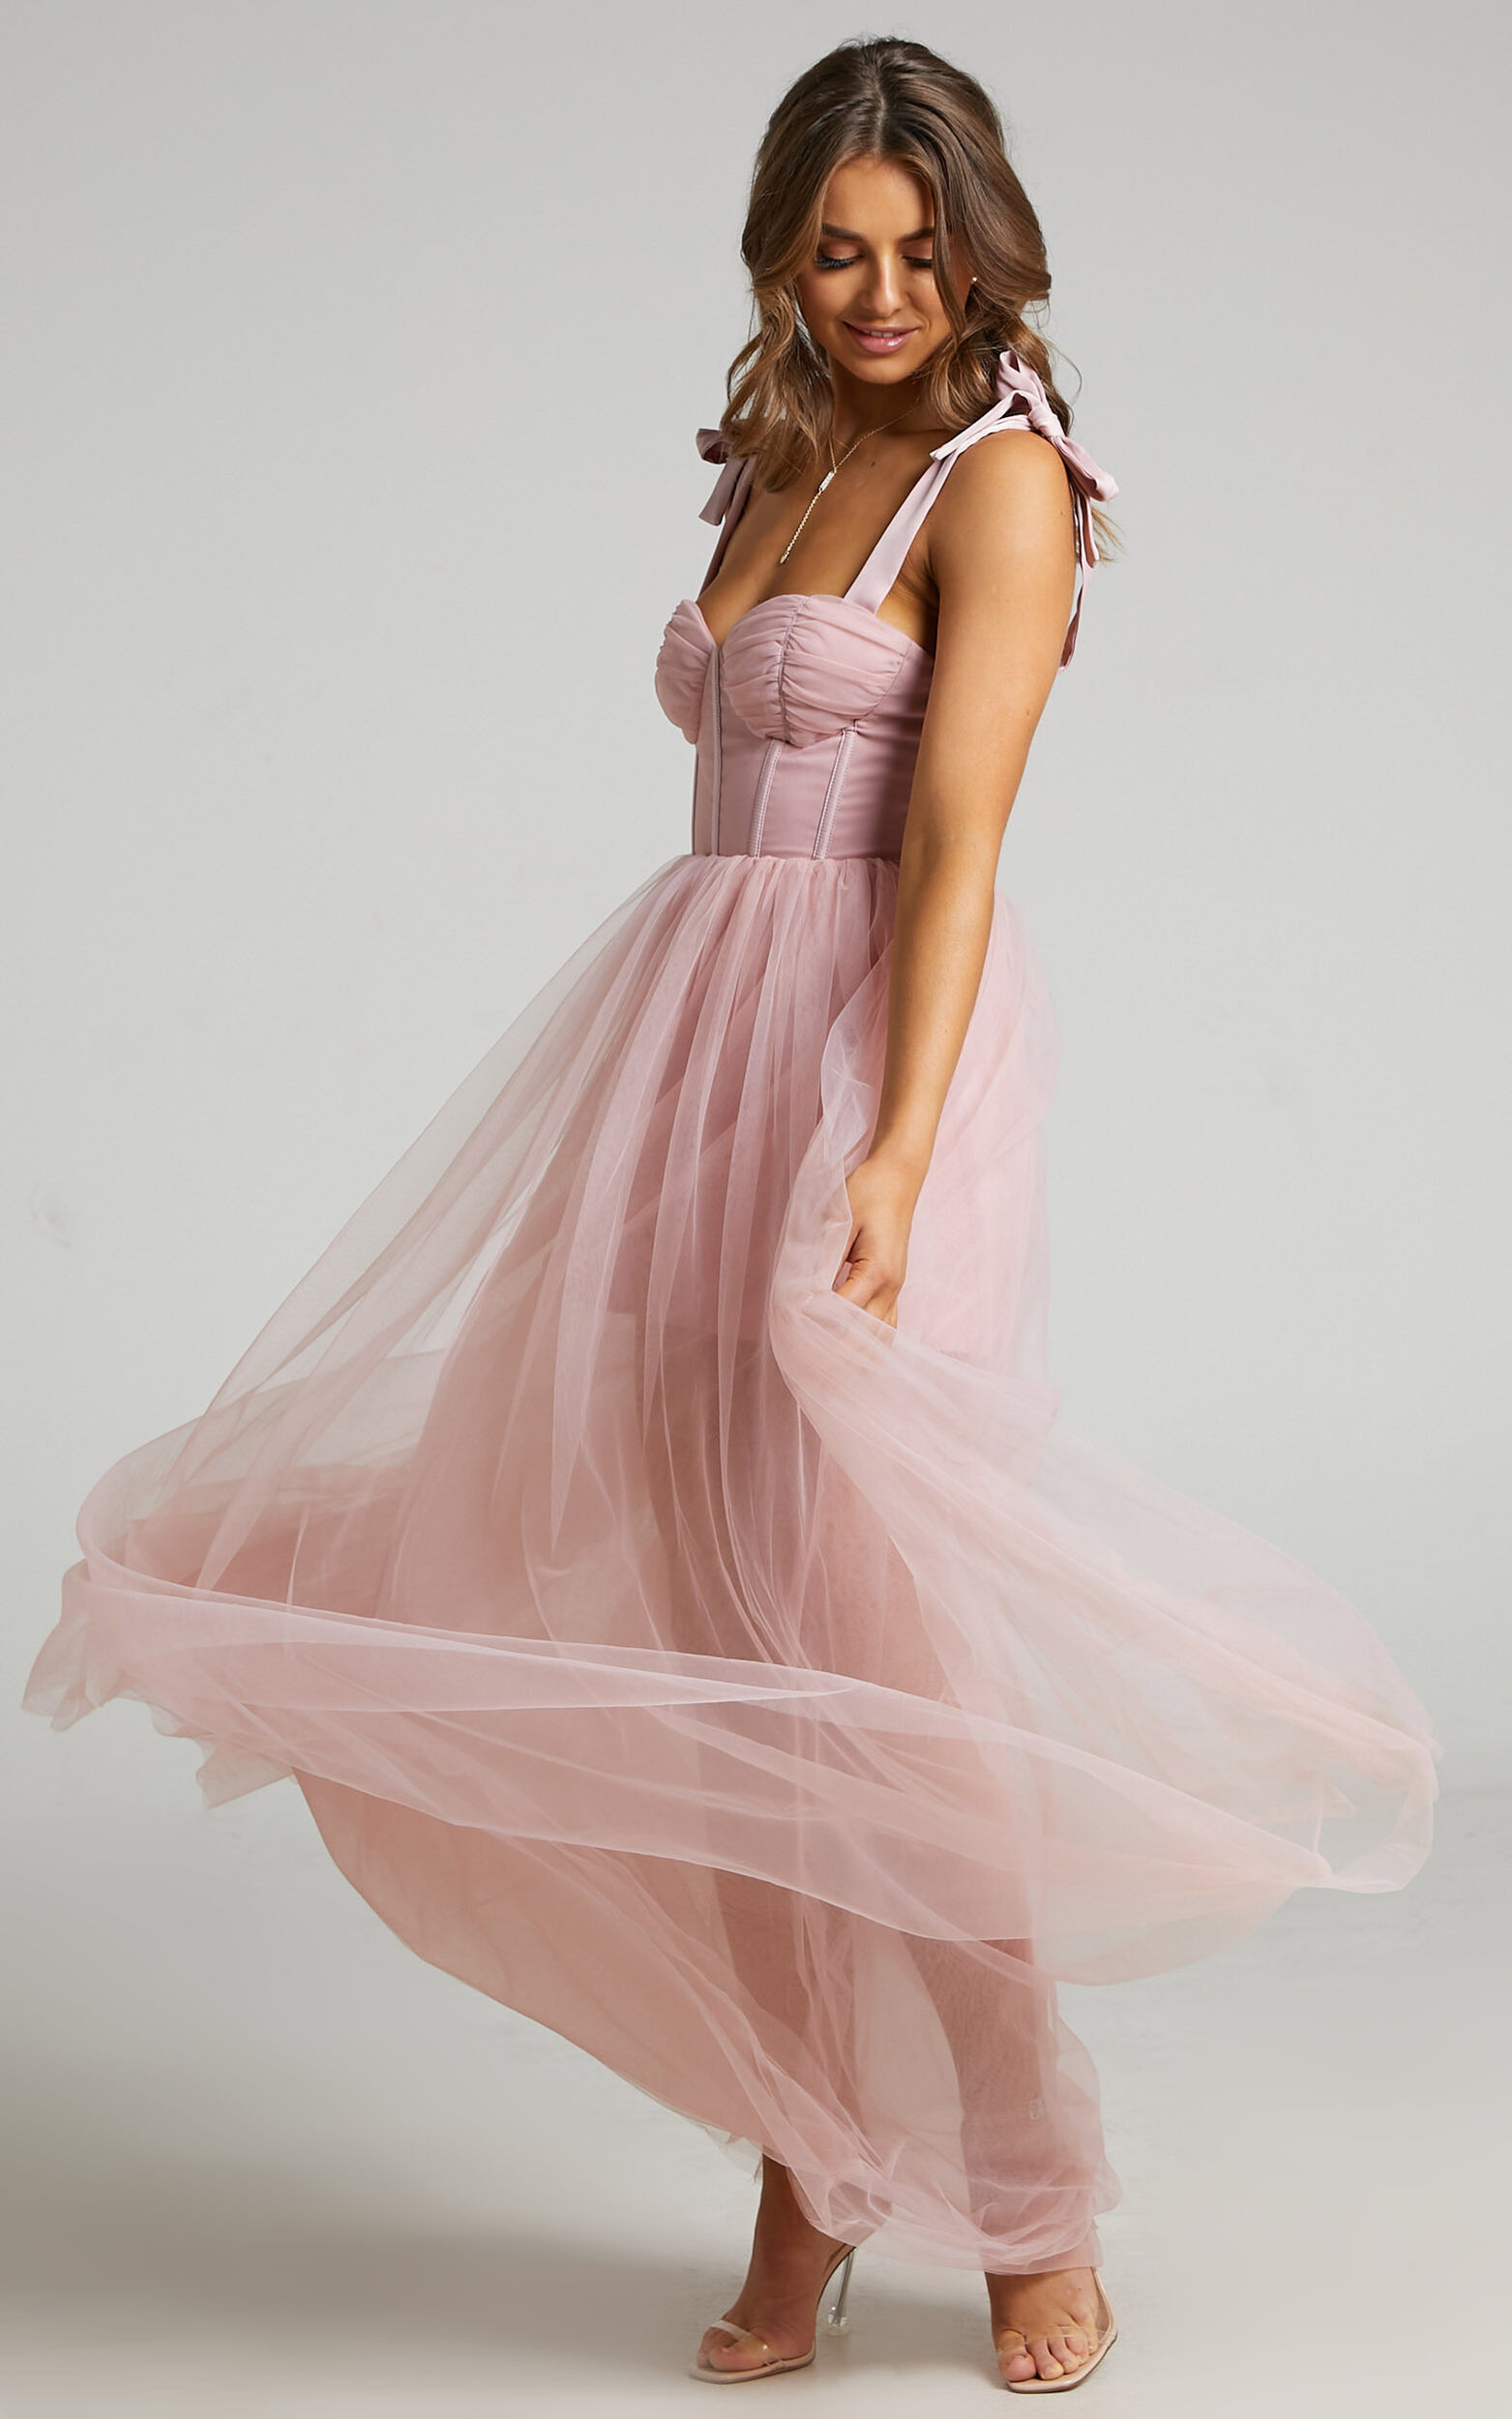 Emmary Gown - Bustier Bodice Tulle Gown in Pink